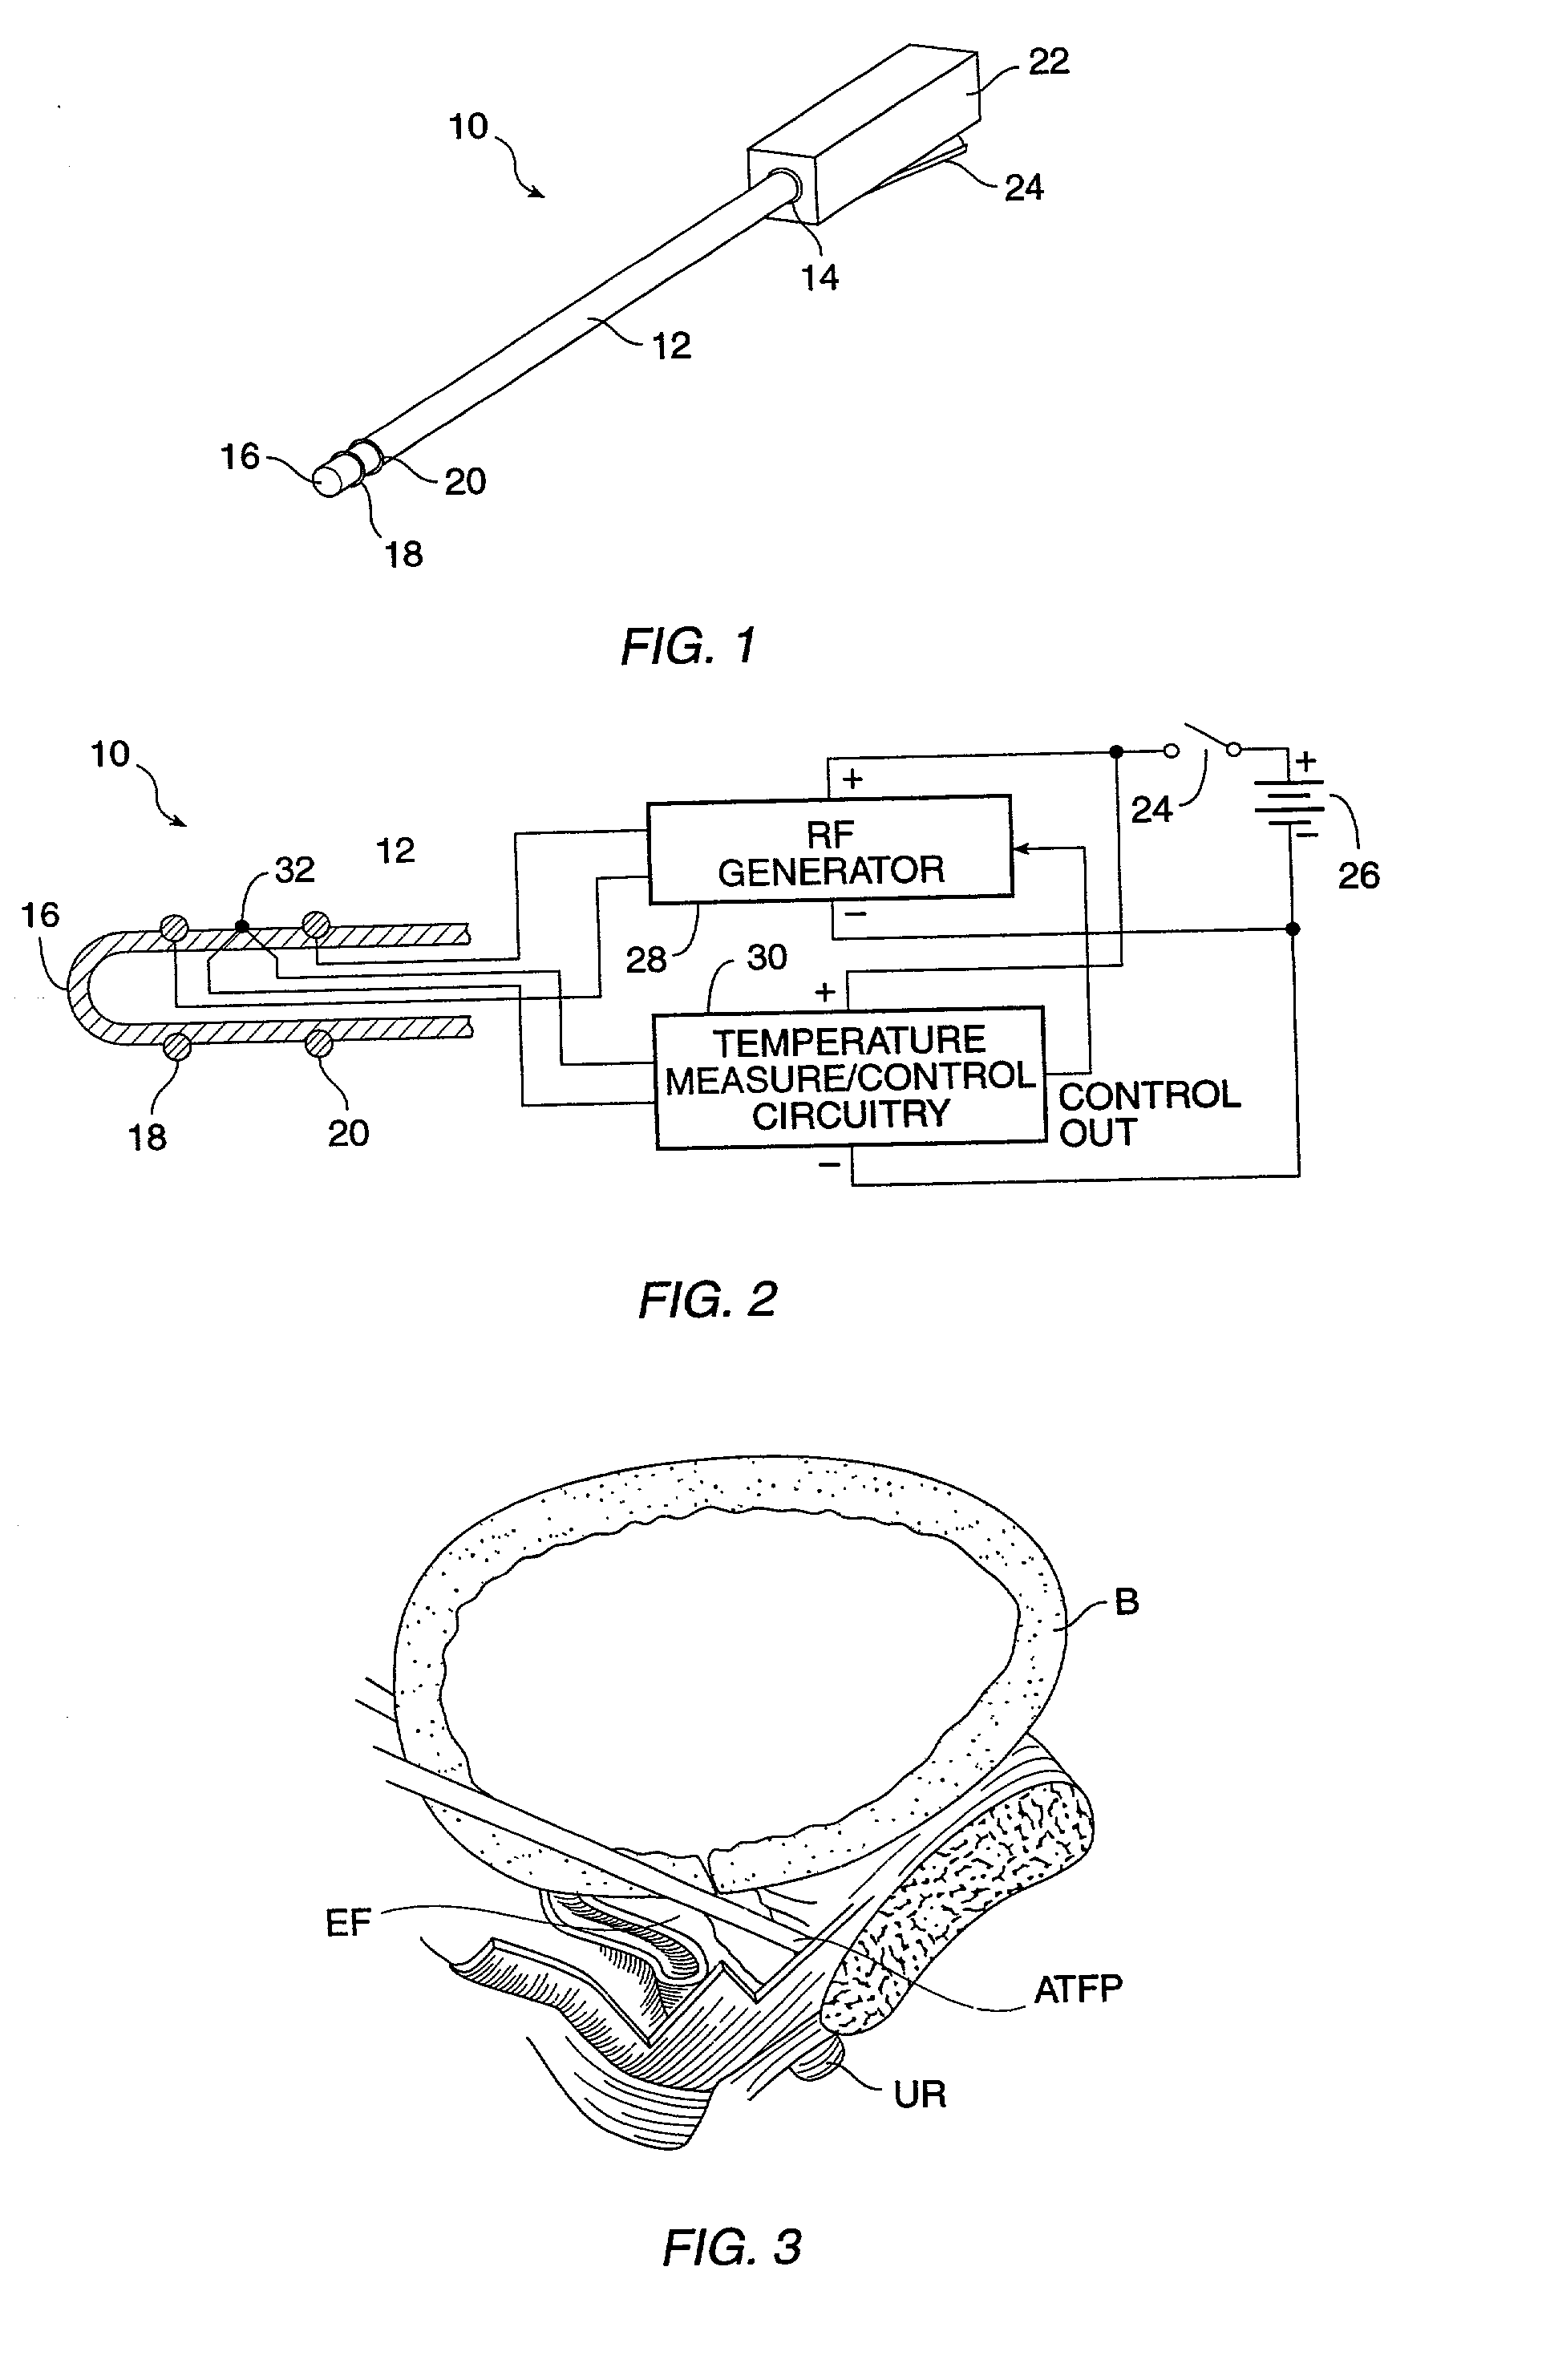 Devices, methods, and systems for shrinking tissues